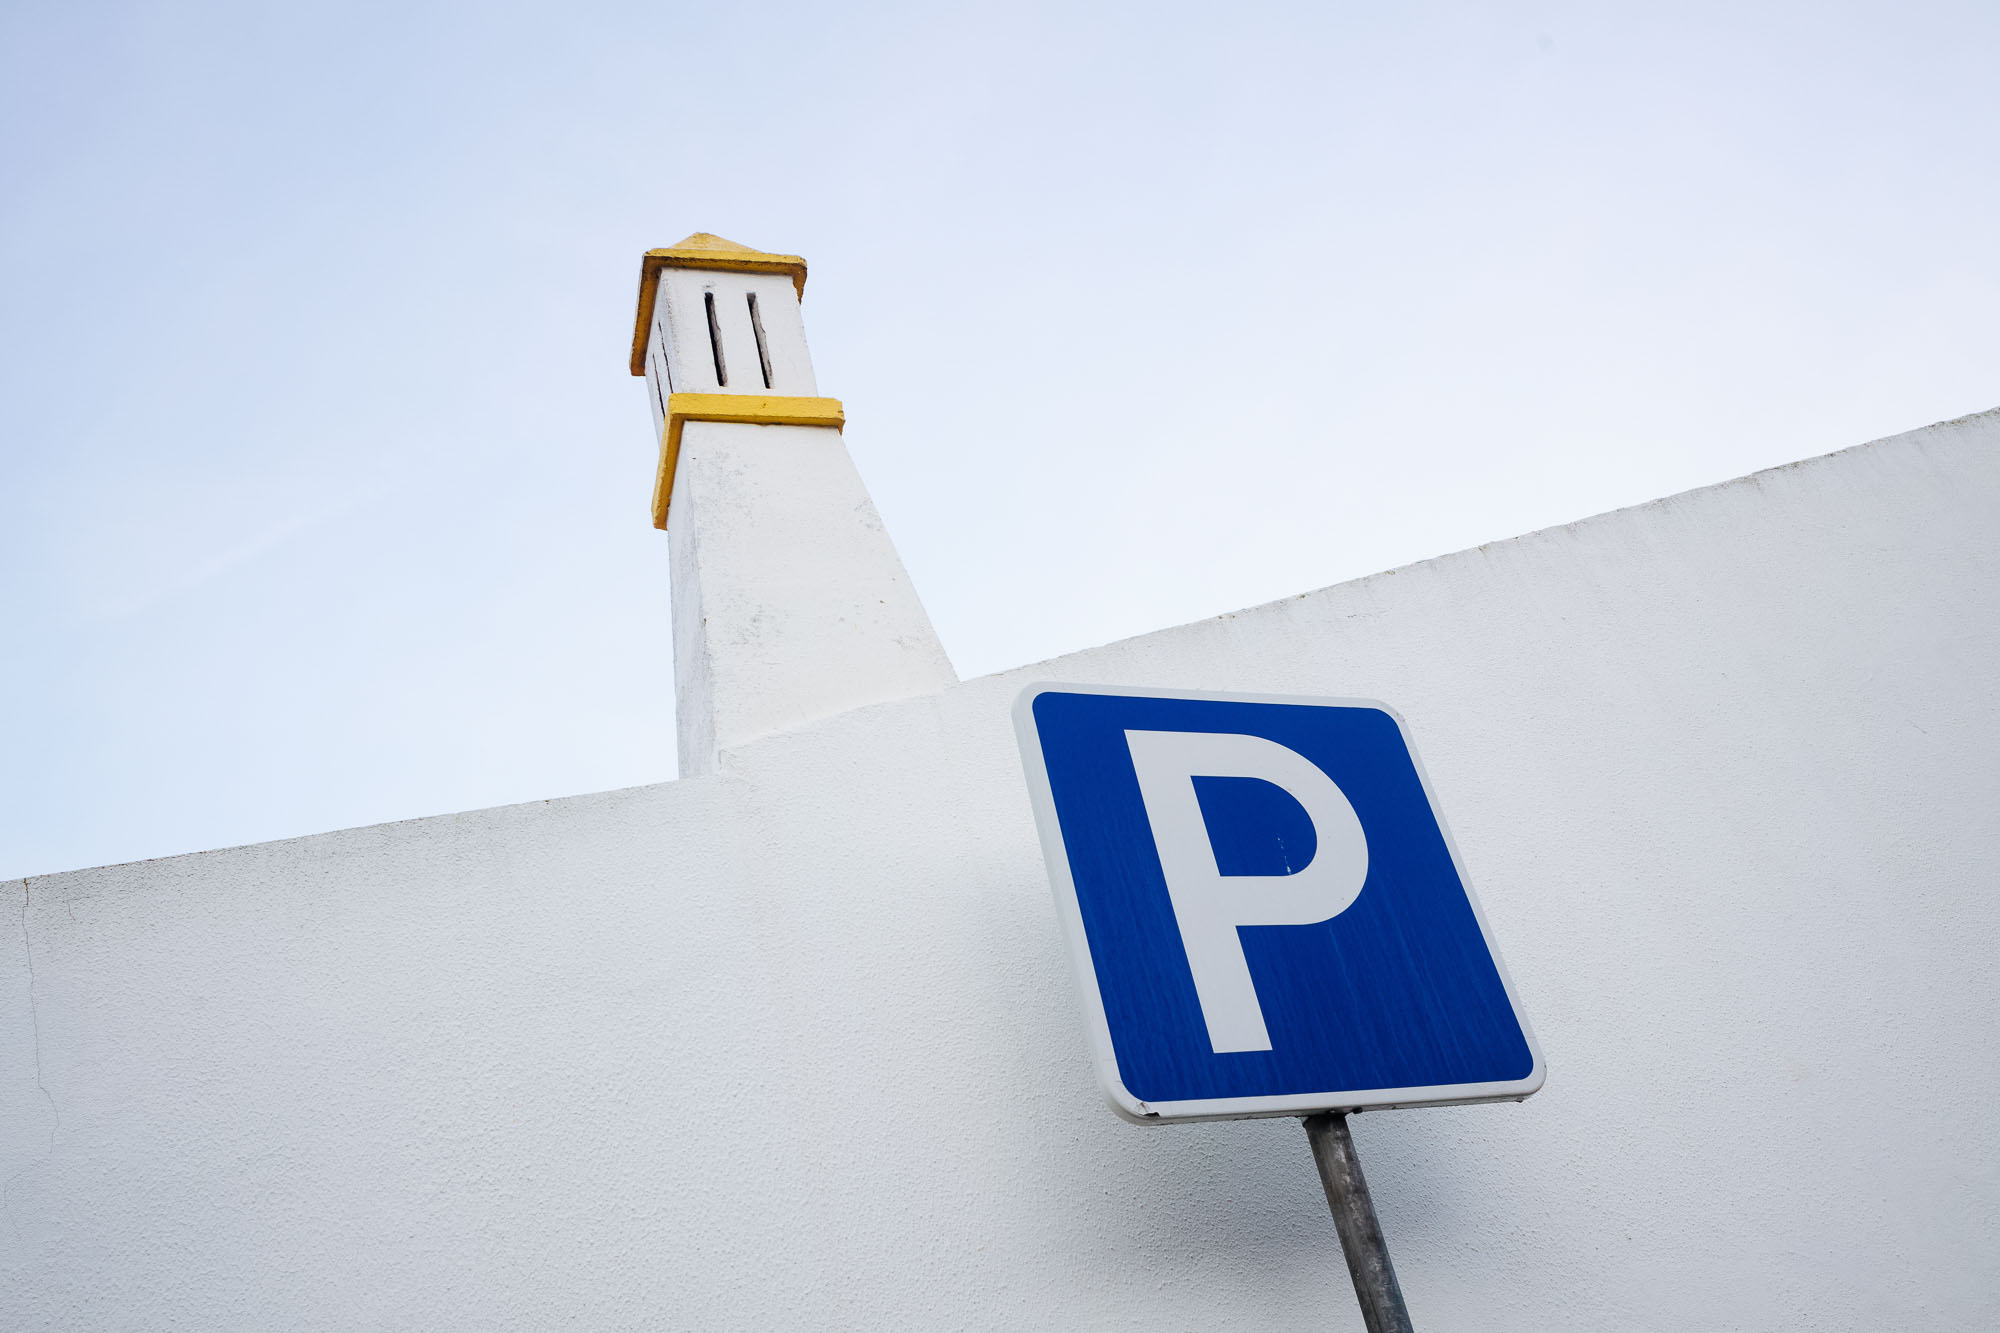 P for parking sign and chimney against sky